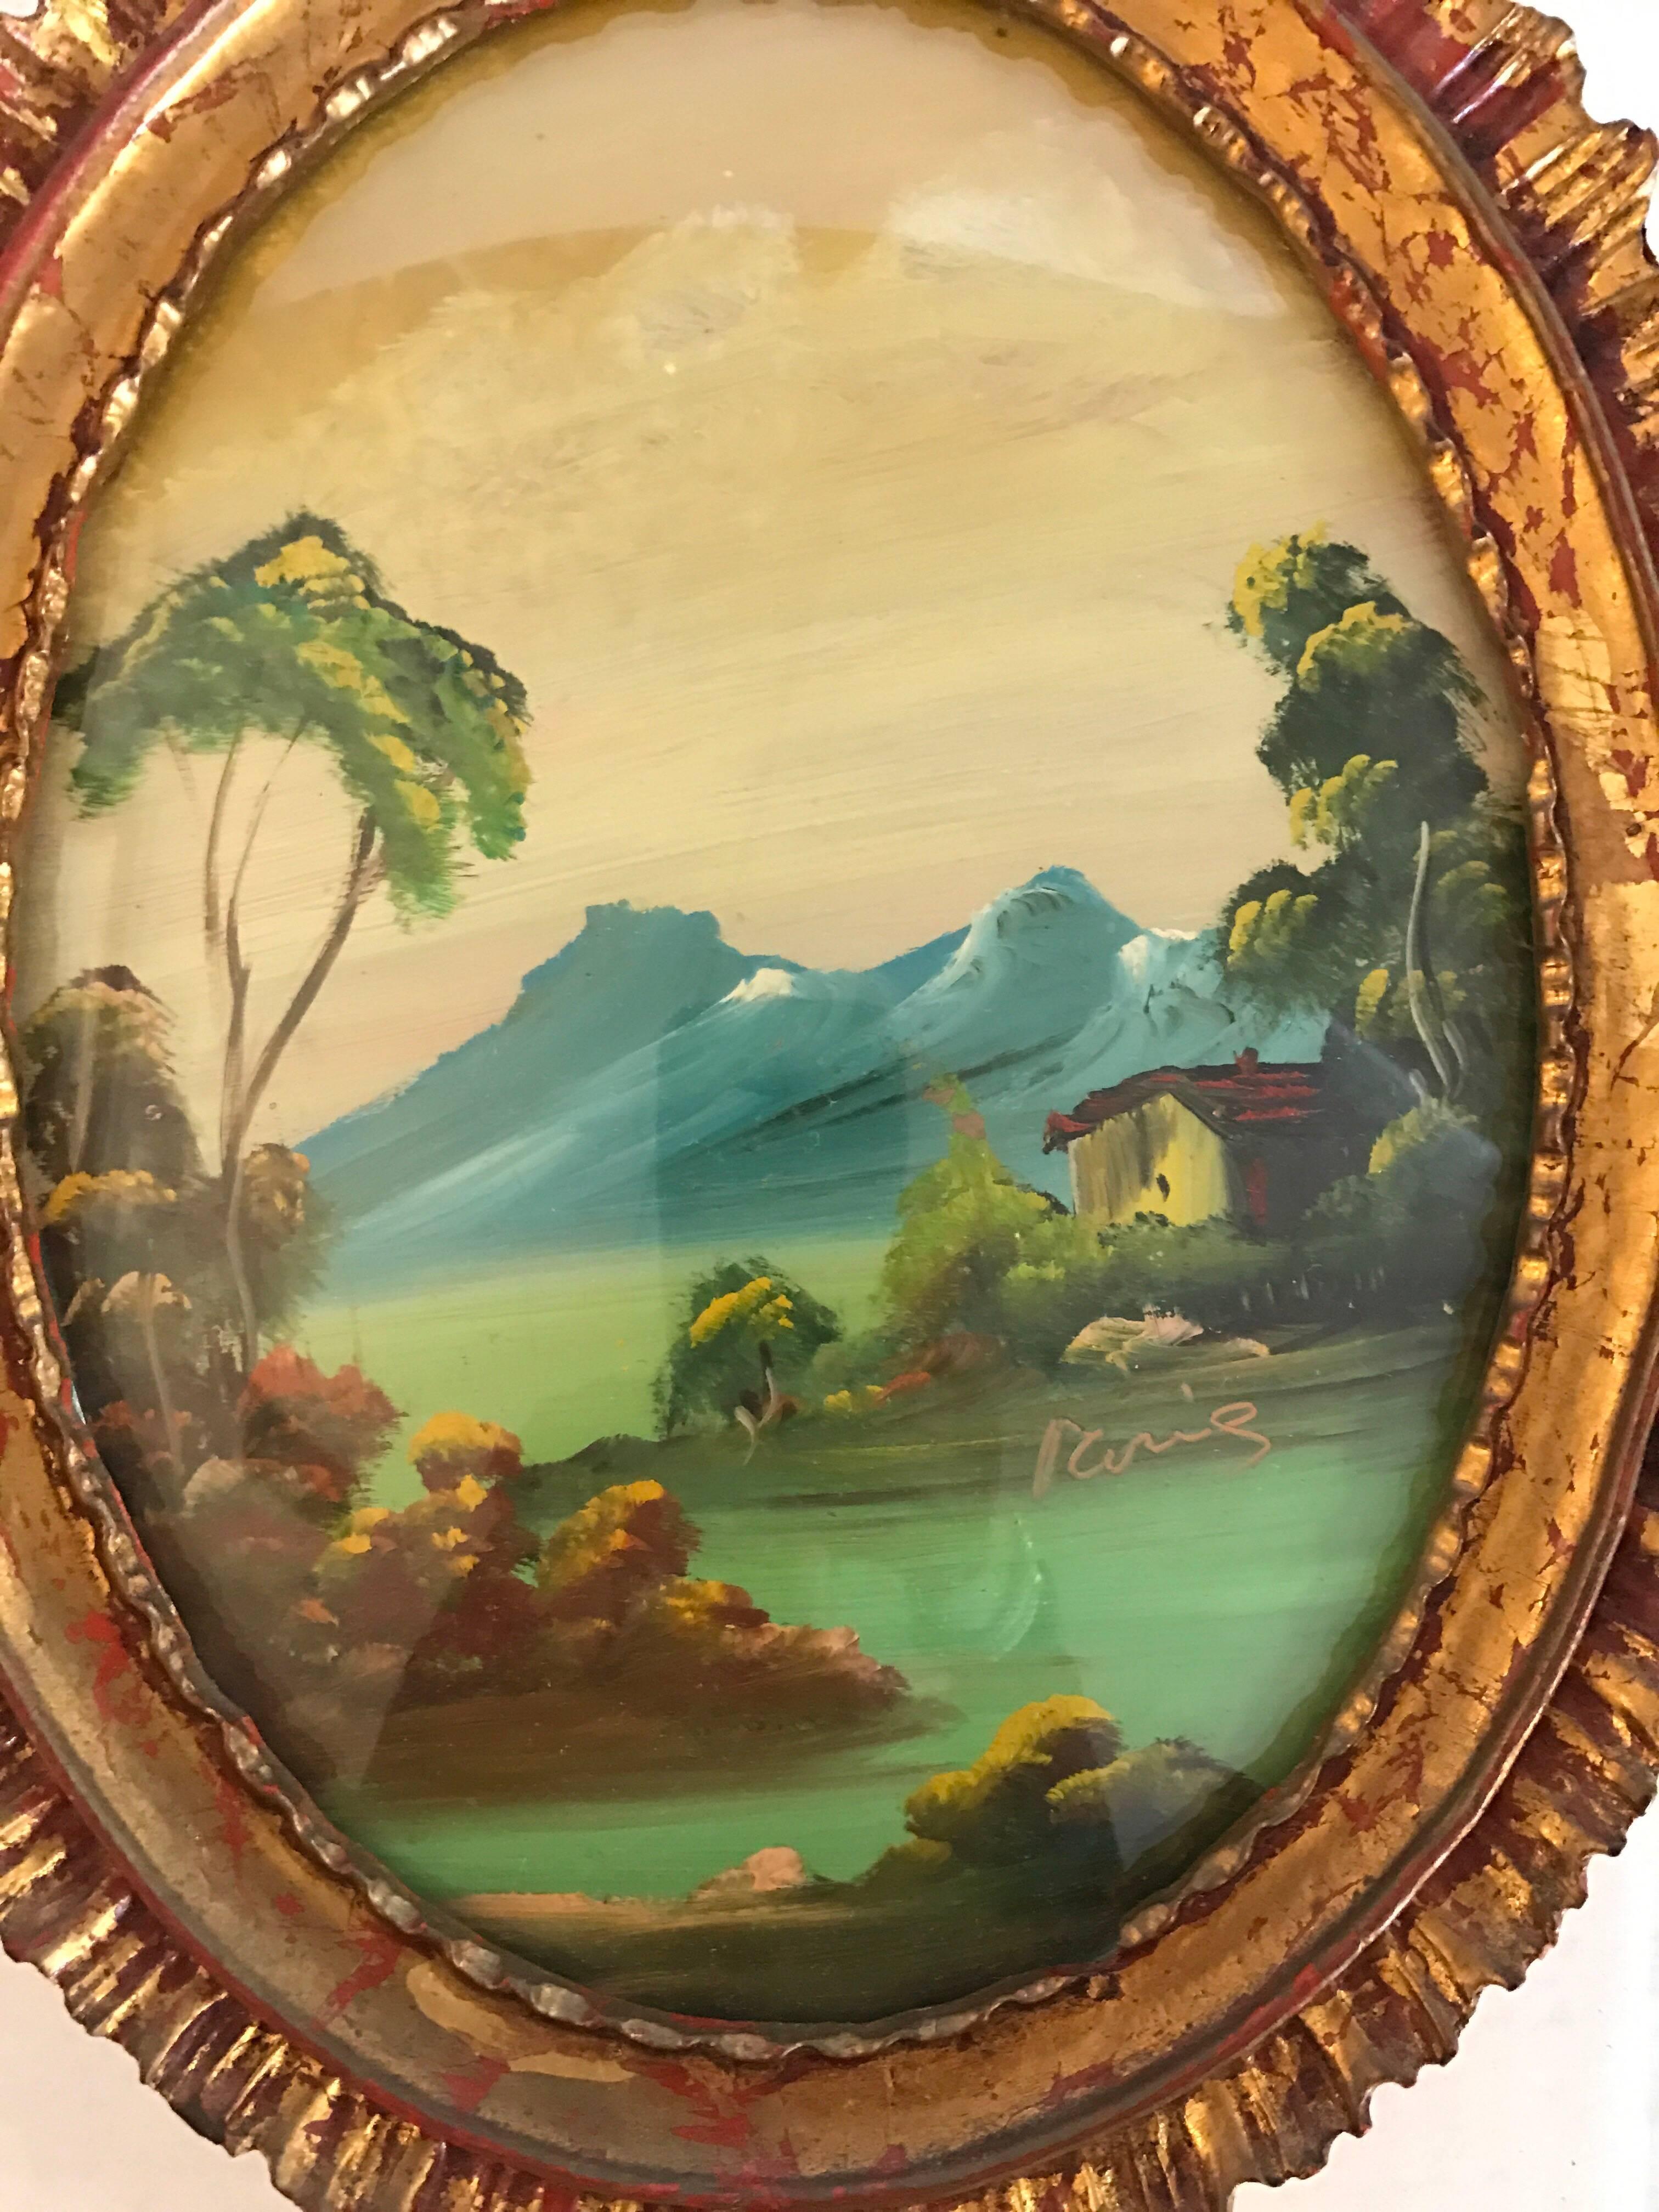 Pair of 19th century Italian oval landscape oil paintings under glass and displayed in carved giltwood frames.  Medium is oil on canvas and glass is slightly convex.  The painting that shows two sailboats is signed on the bottom left by the artist